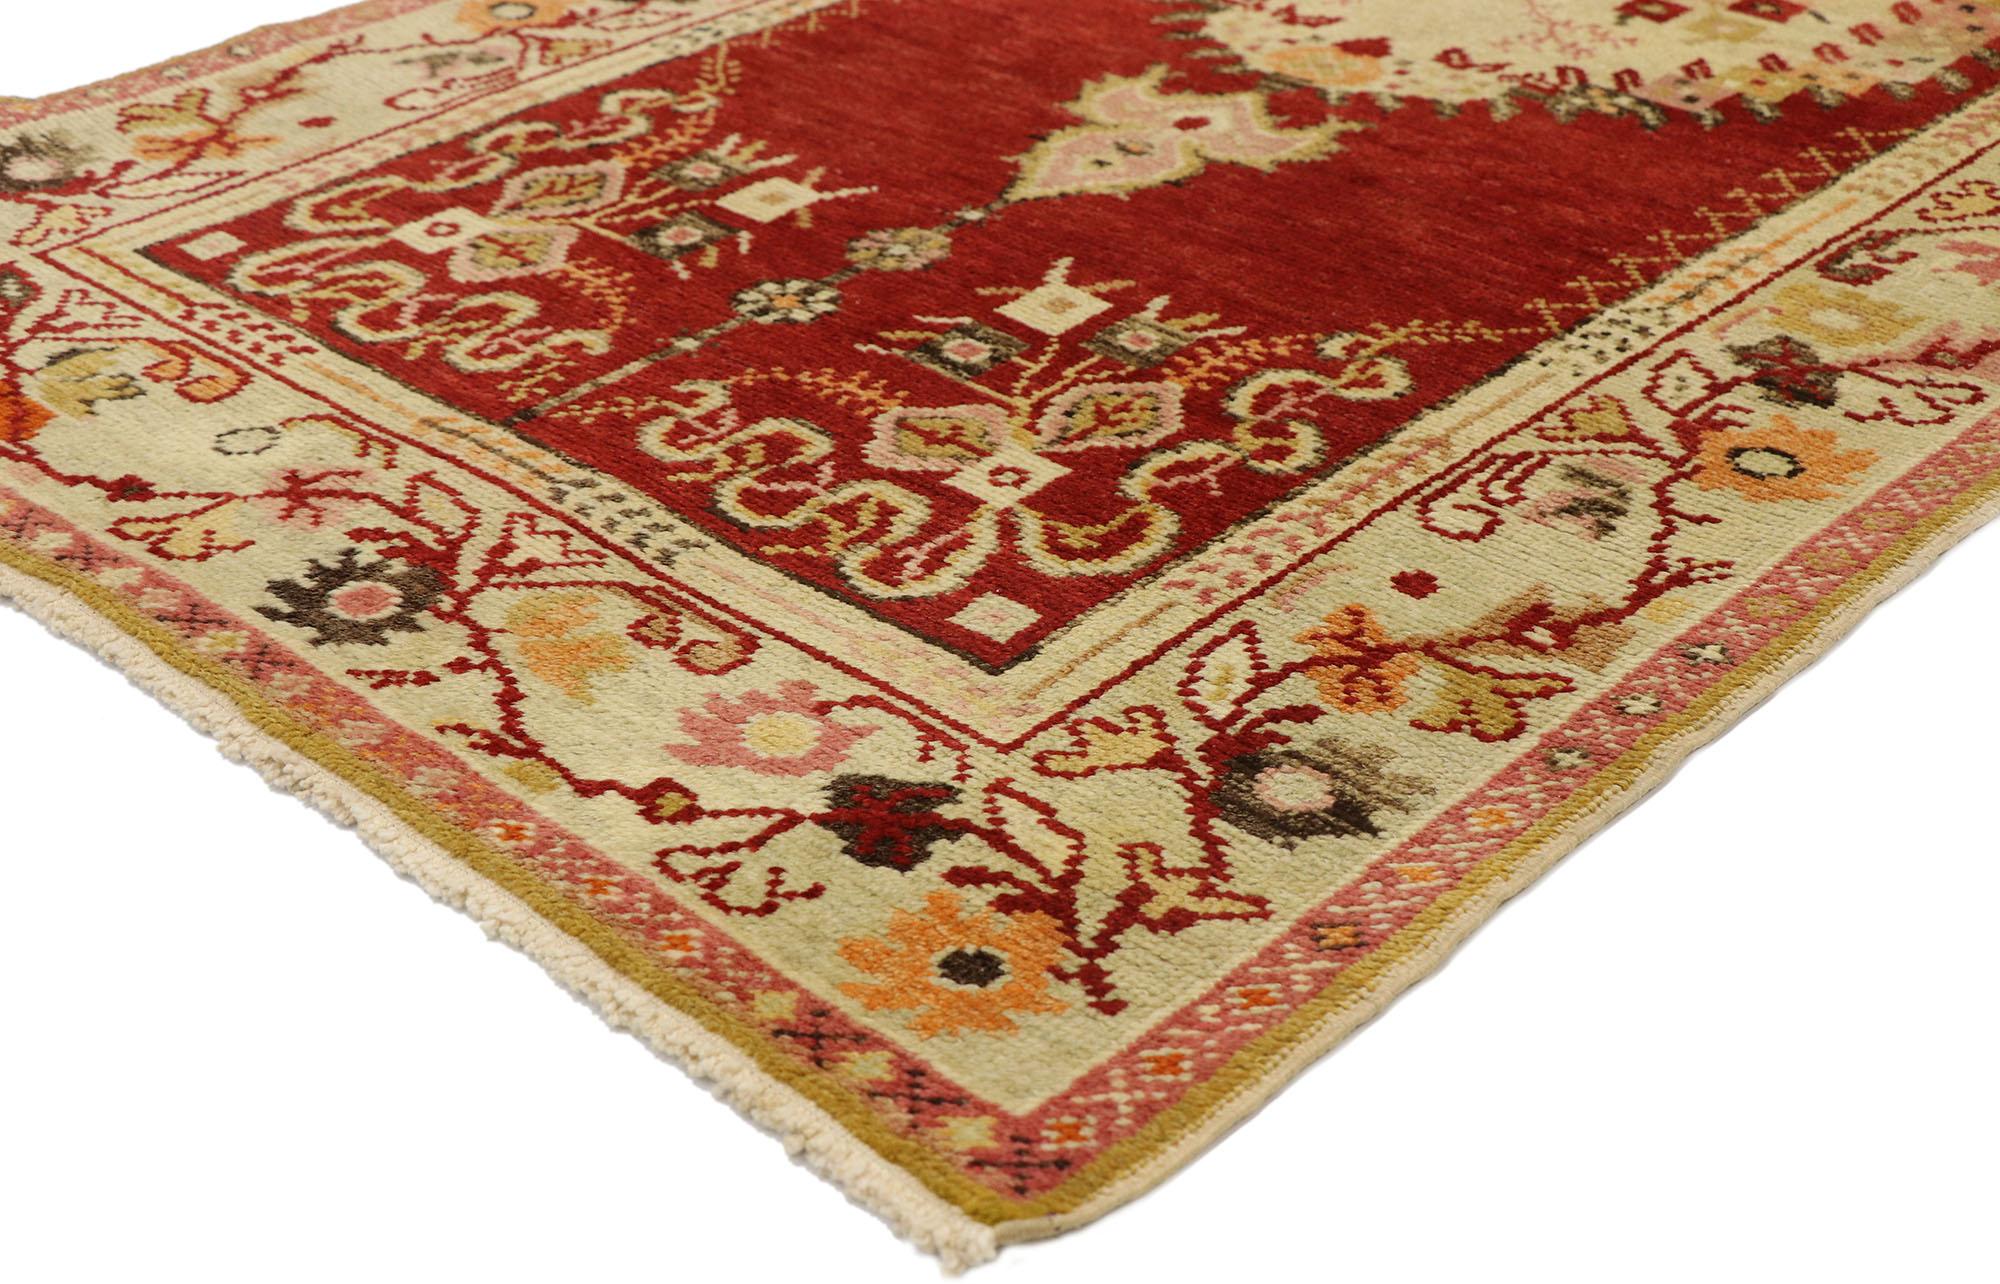 50104, vintage Turkish Oushak rug with French Rococo style, Entry or Foyer rug. This traditional style Oushak rug features a central geometric beige medallion surrounded by a medallion border of cubes in pastel hues, a bouquet of flowers in the